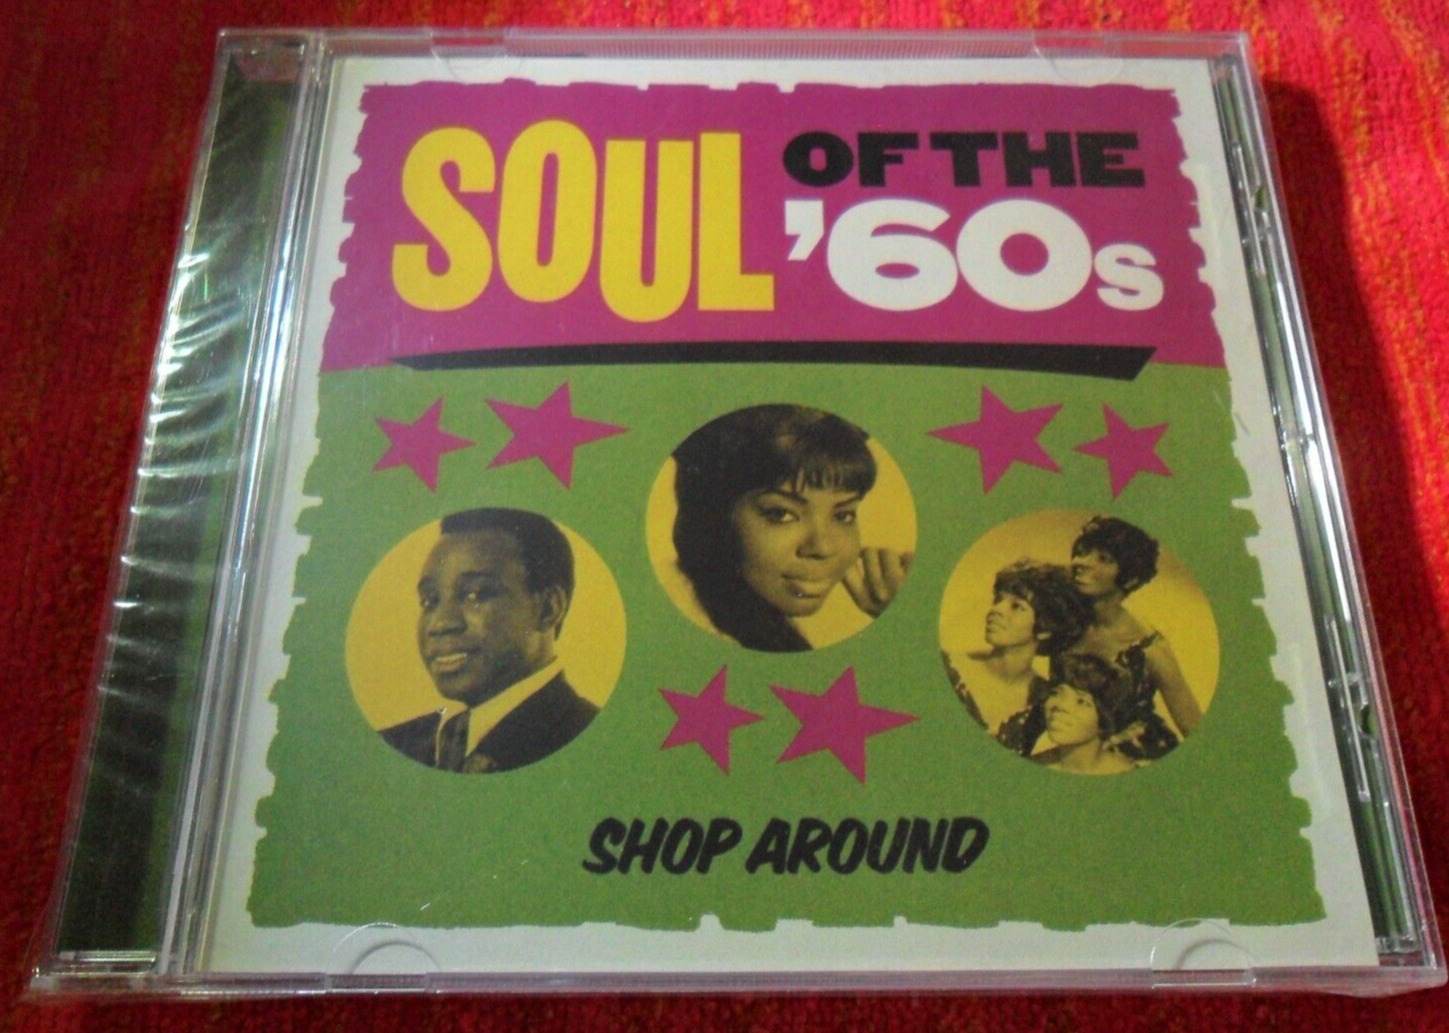 2014 SOUL OF THE 60\'S SHOP AROUND CD TIME LIFE ( SEALED ) MINT+